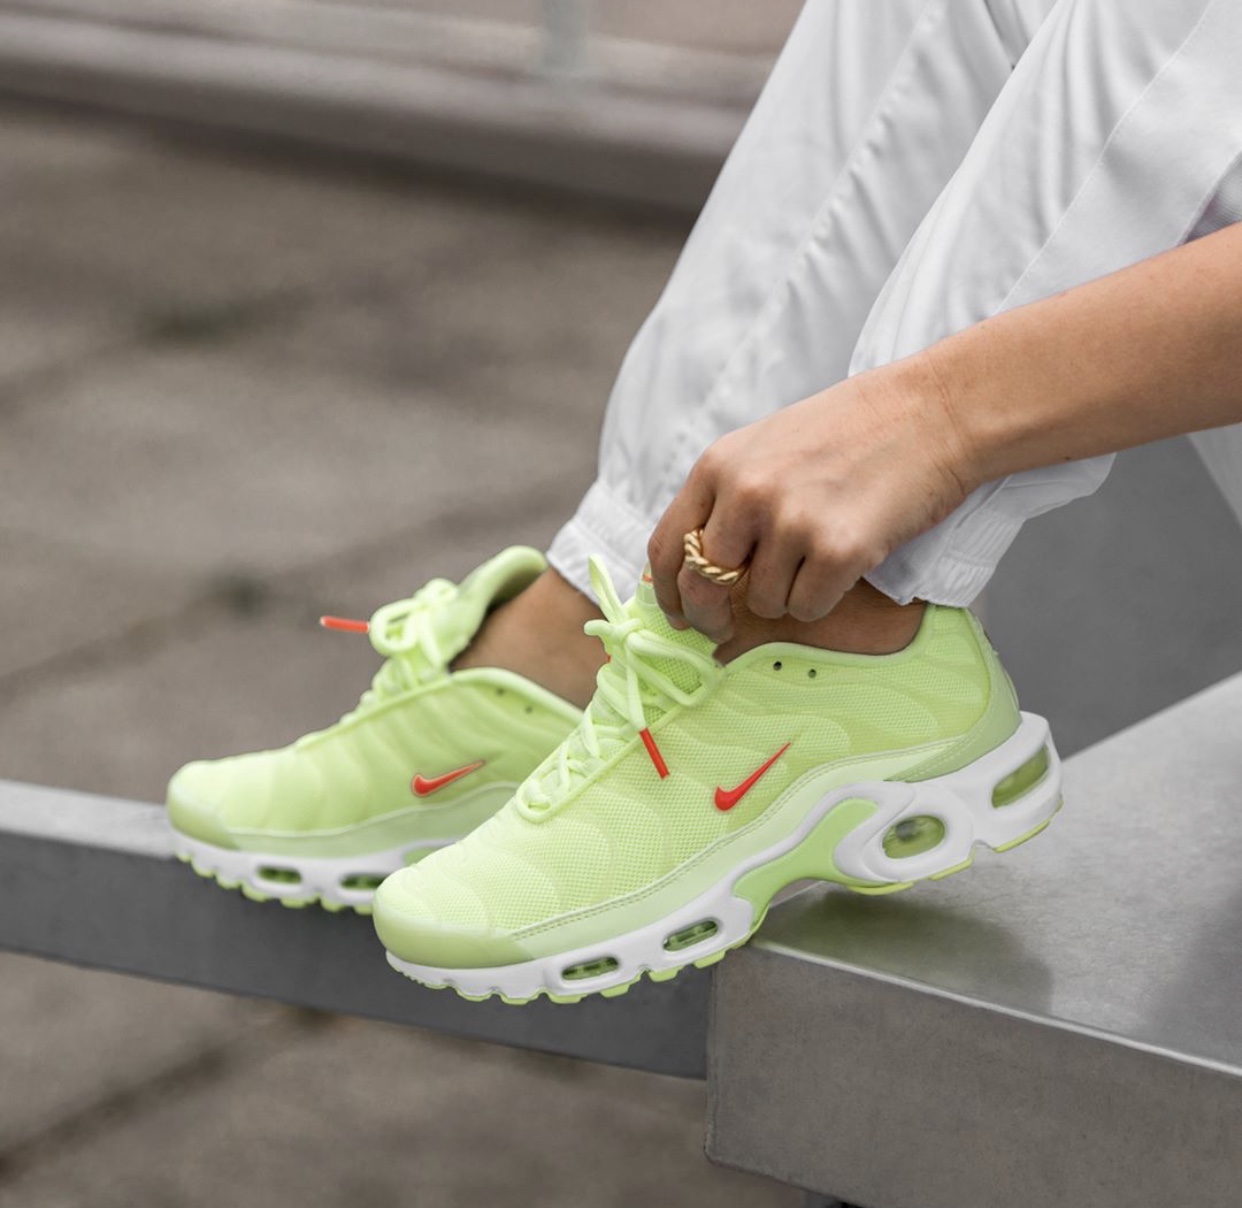 Altitud chico Un pan Barely Volt' Hits The Nike Air Max Plus TN SE — CNK Daily (ChicksNKicks)